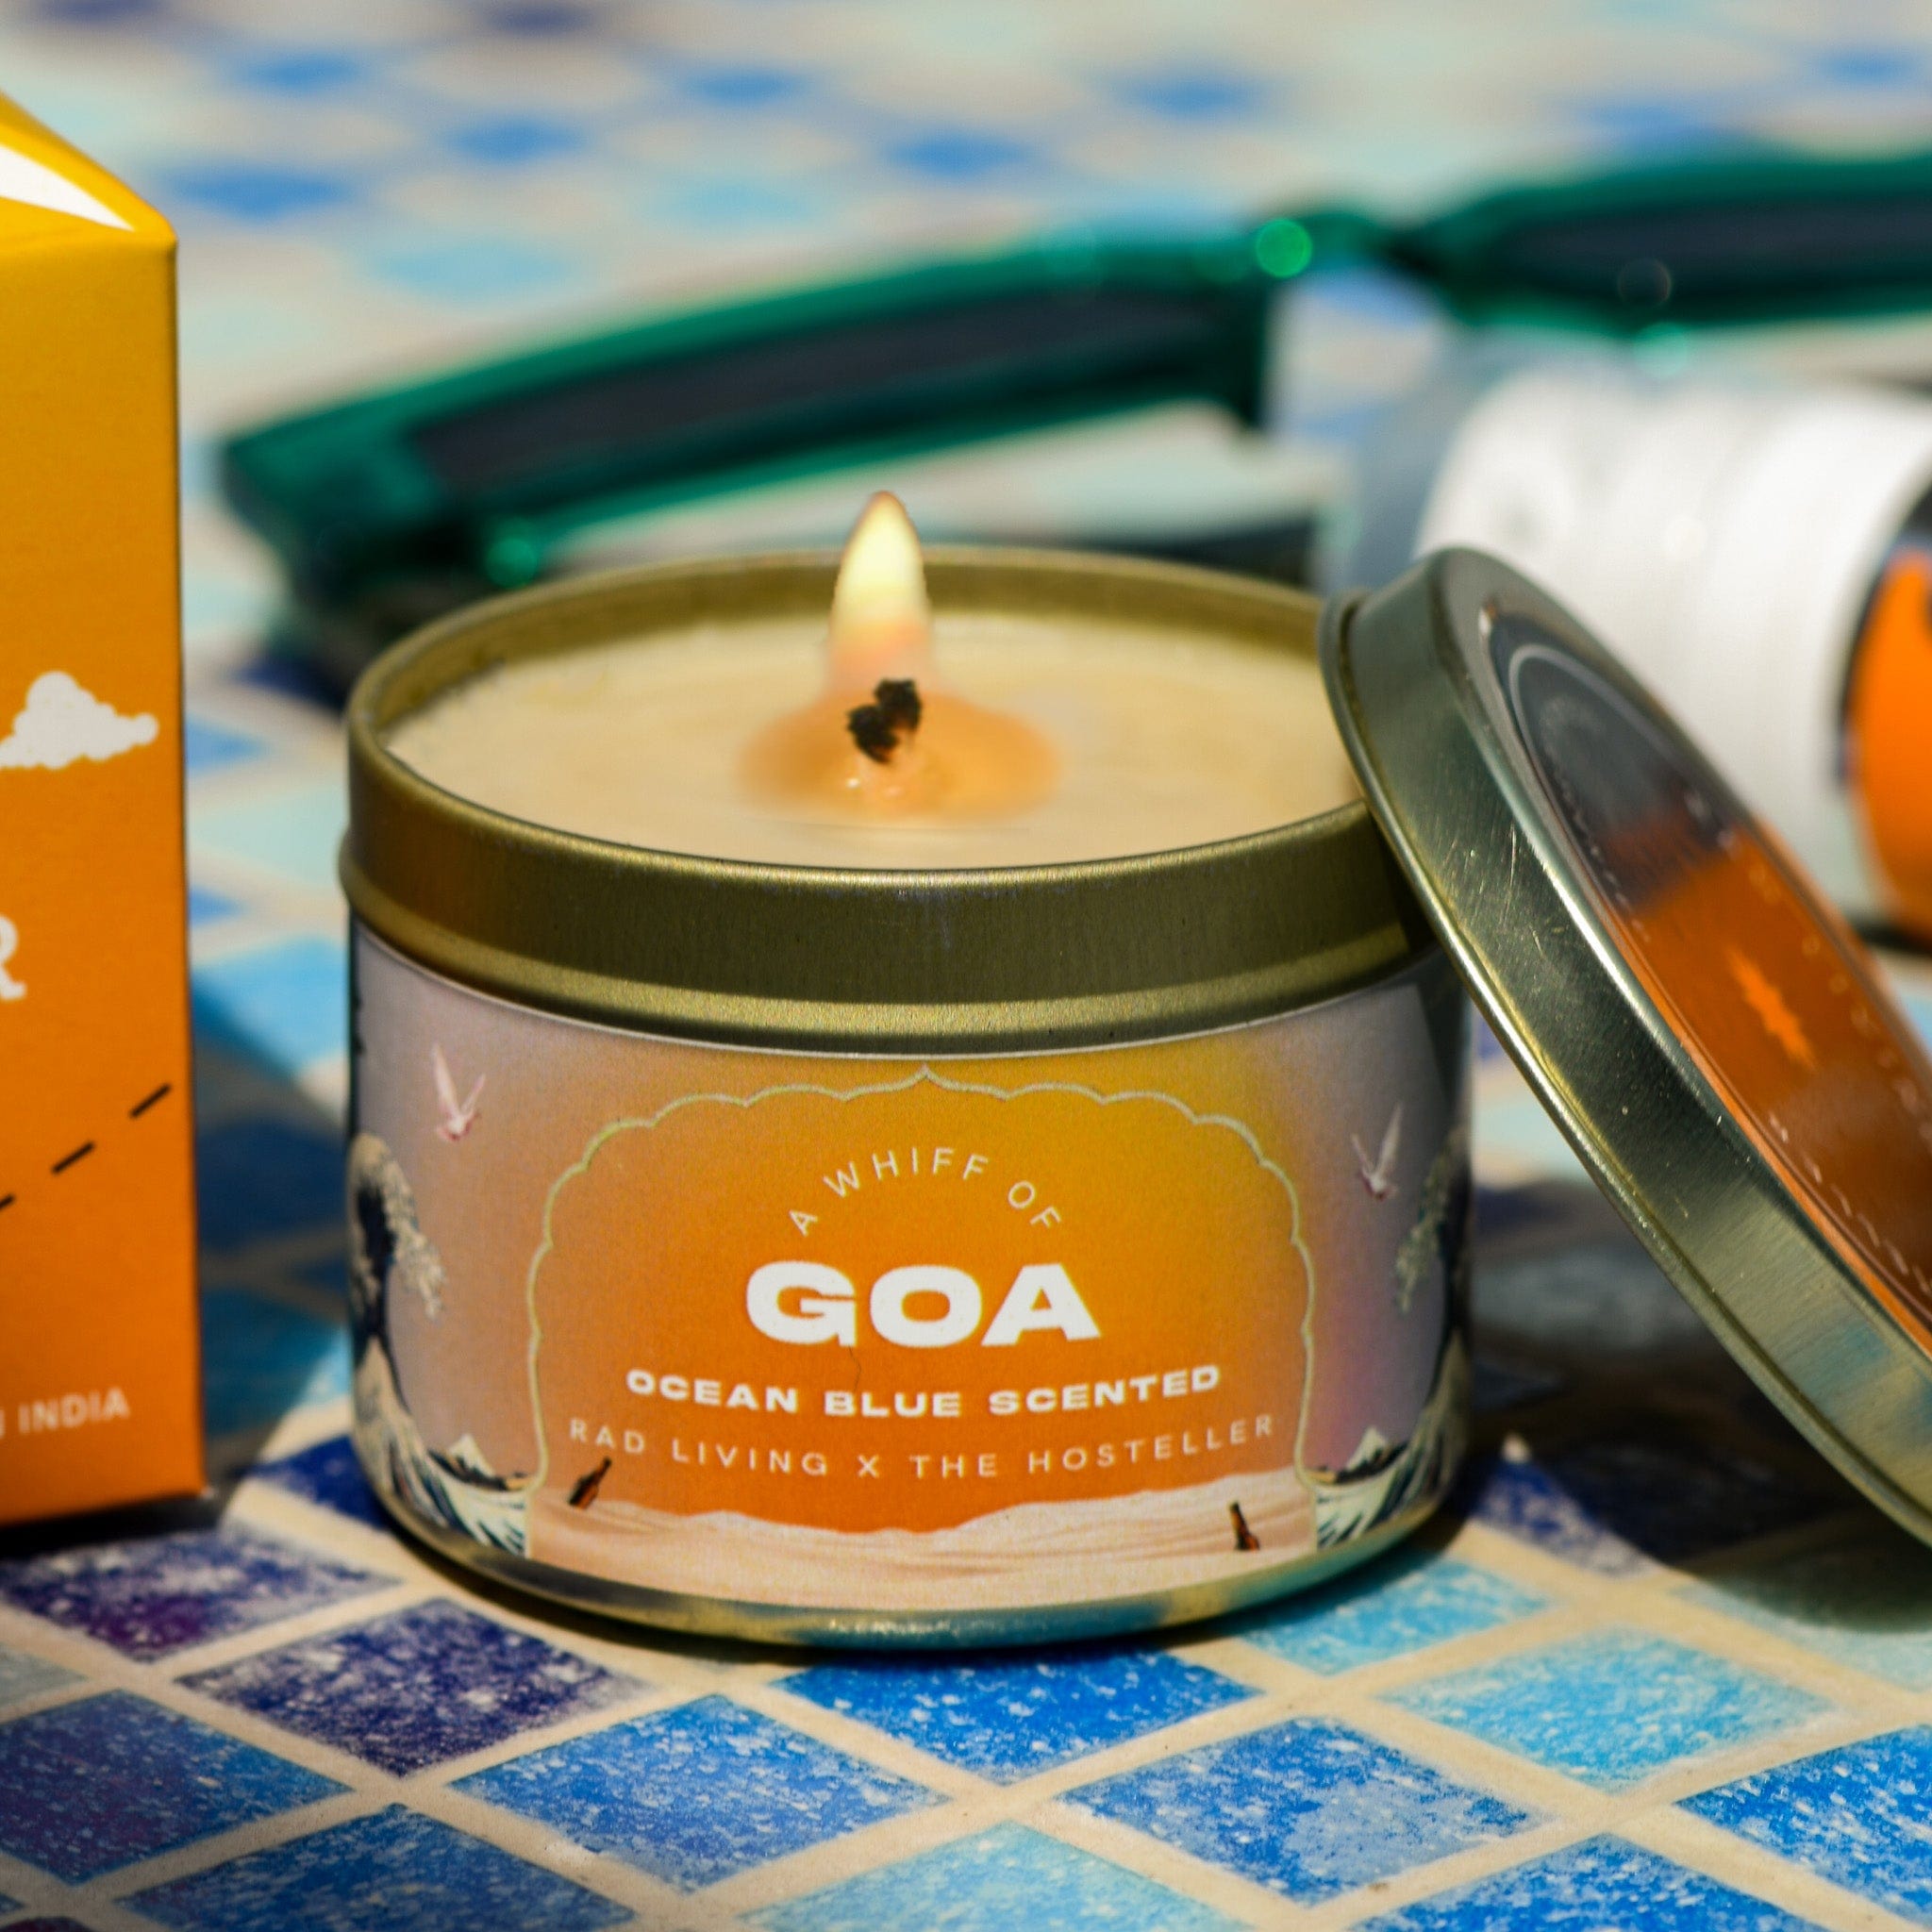 Goa - Ocean Blue Scented Soy Candle